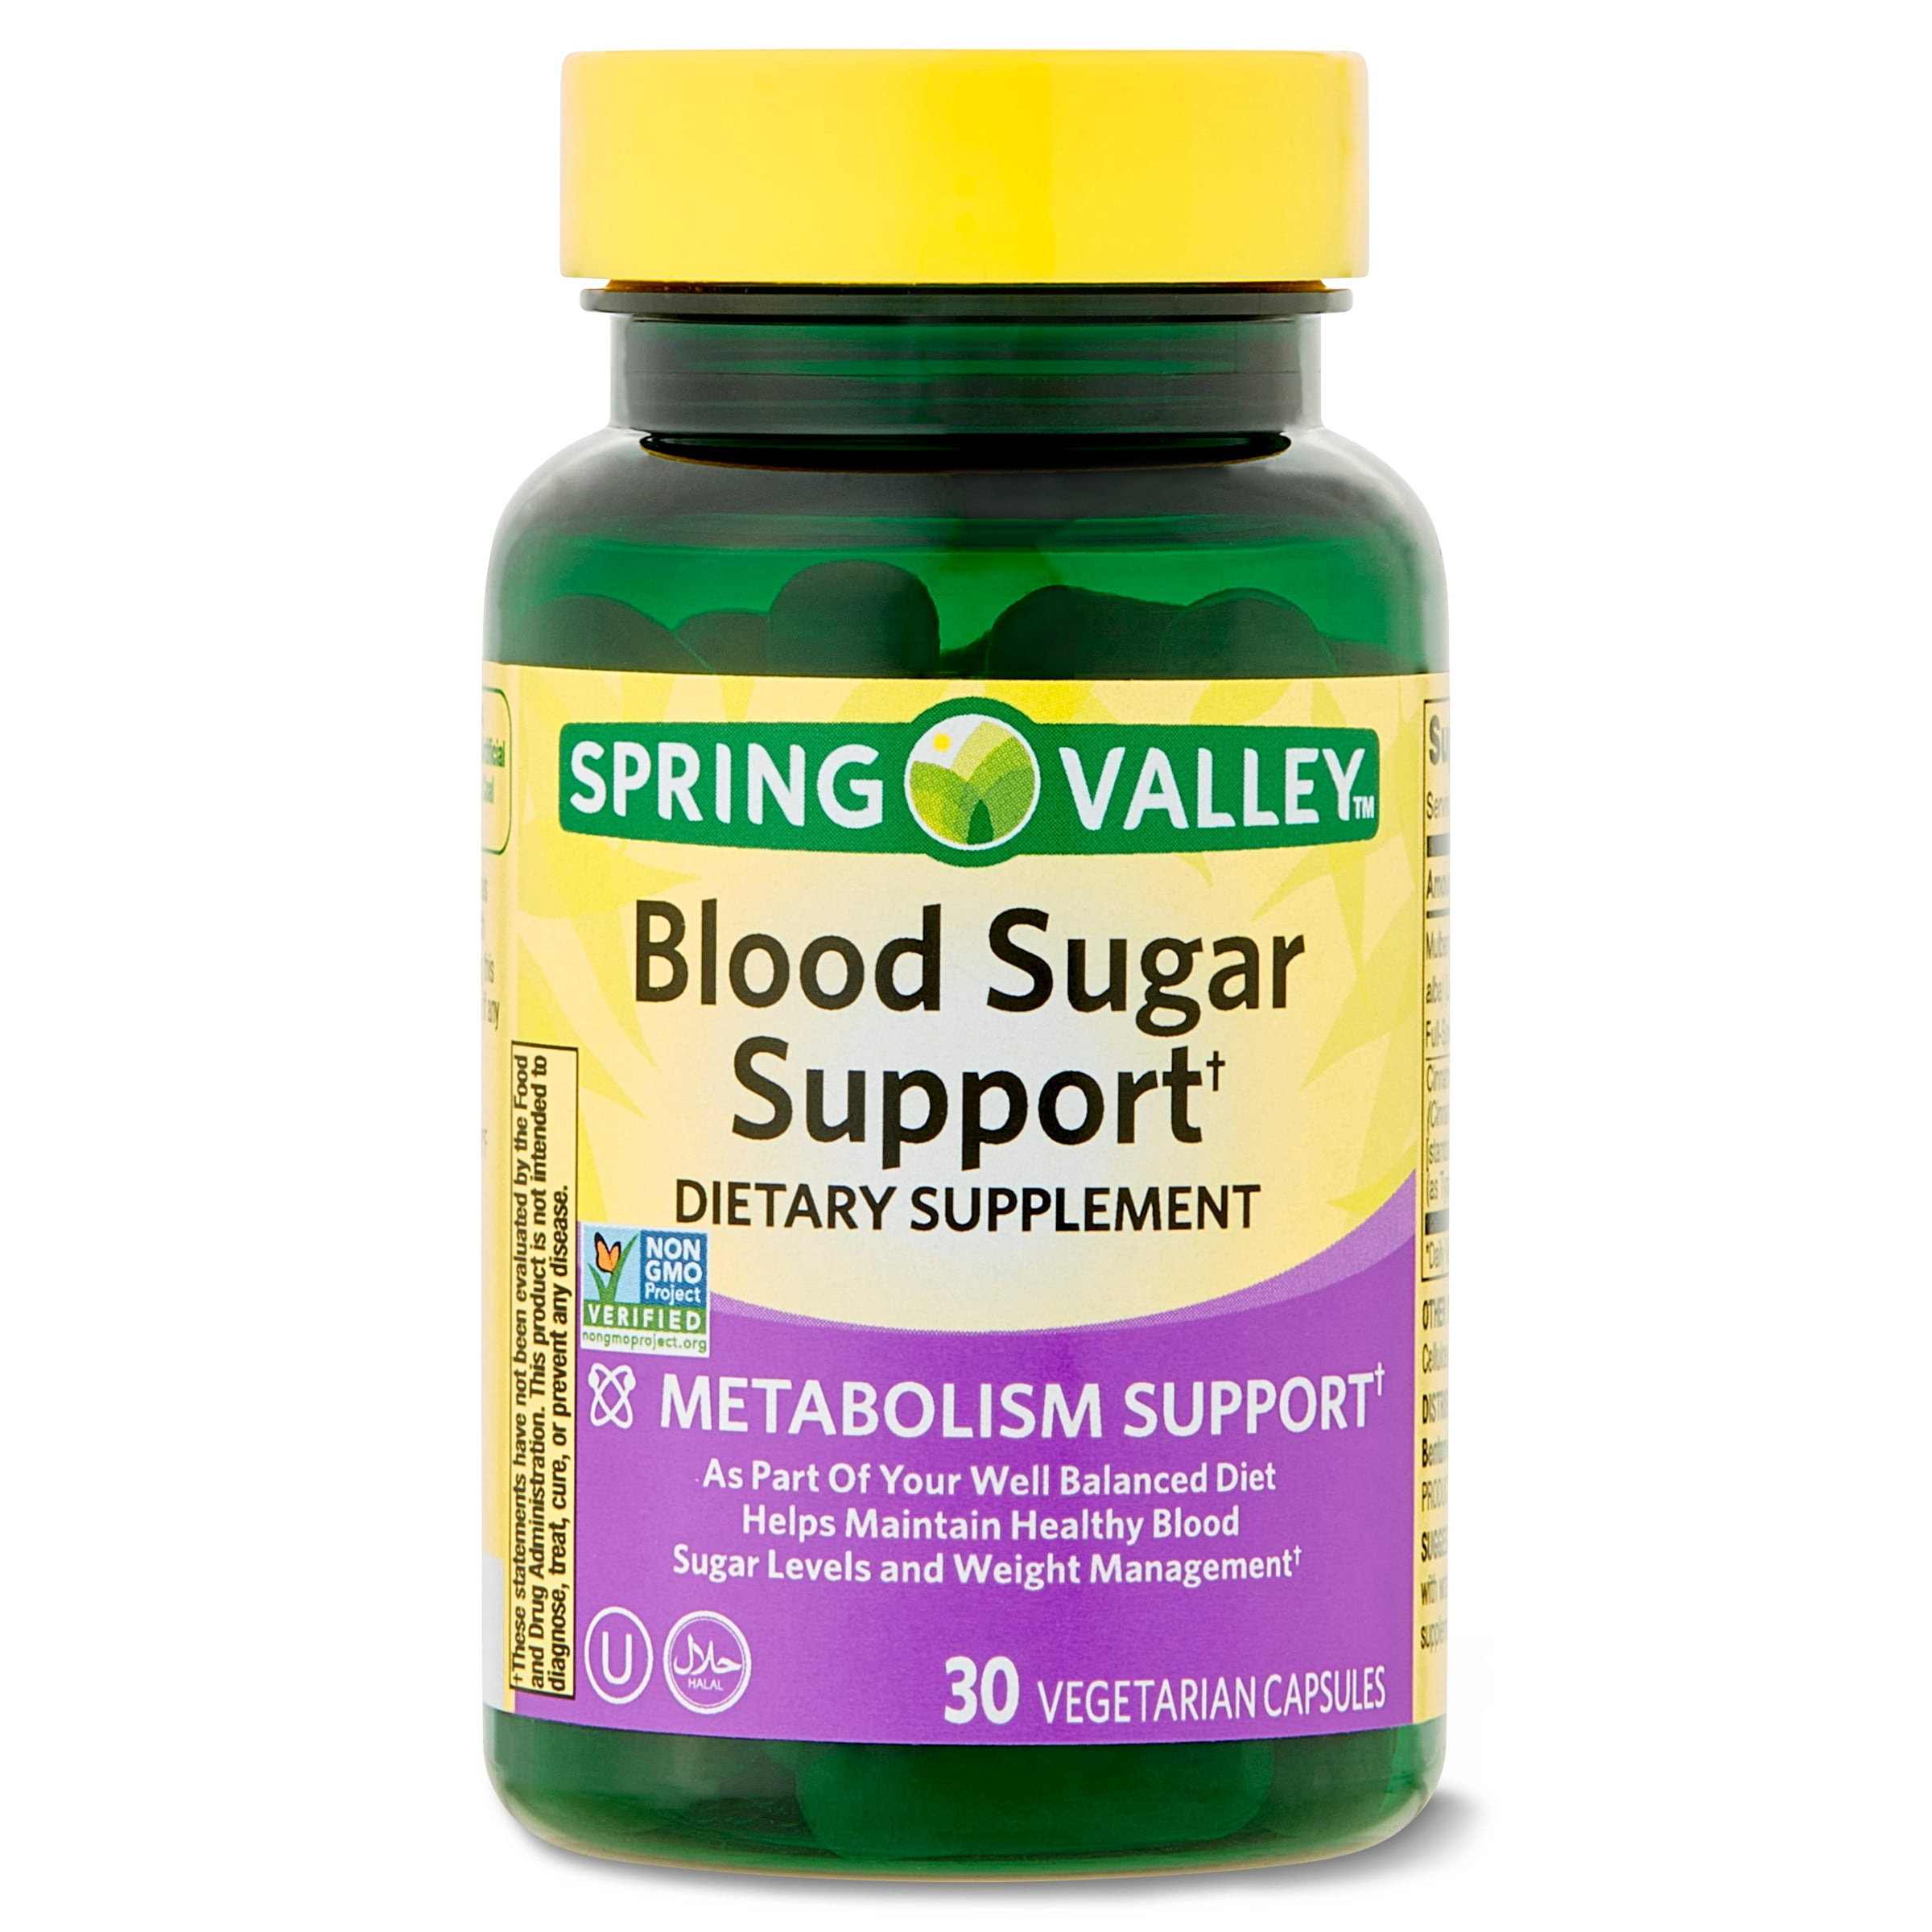 Spring Valley Blood Sugar Support Dietary Supplement, 30 count